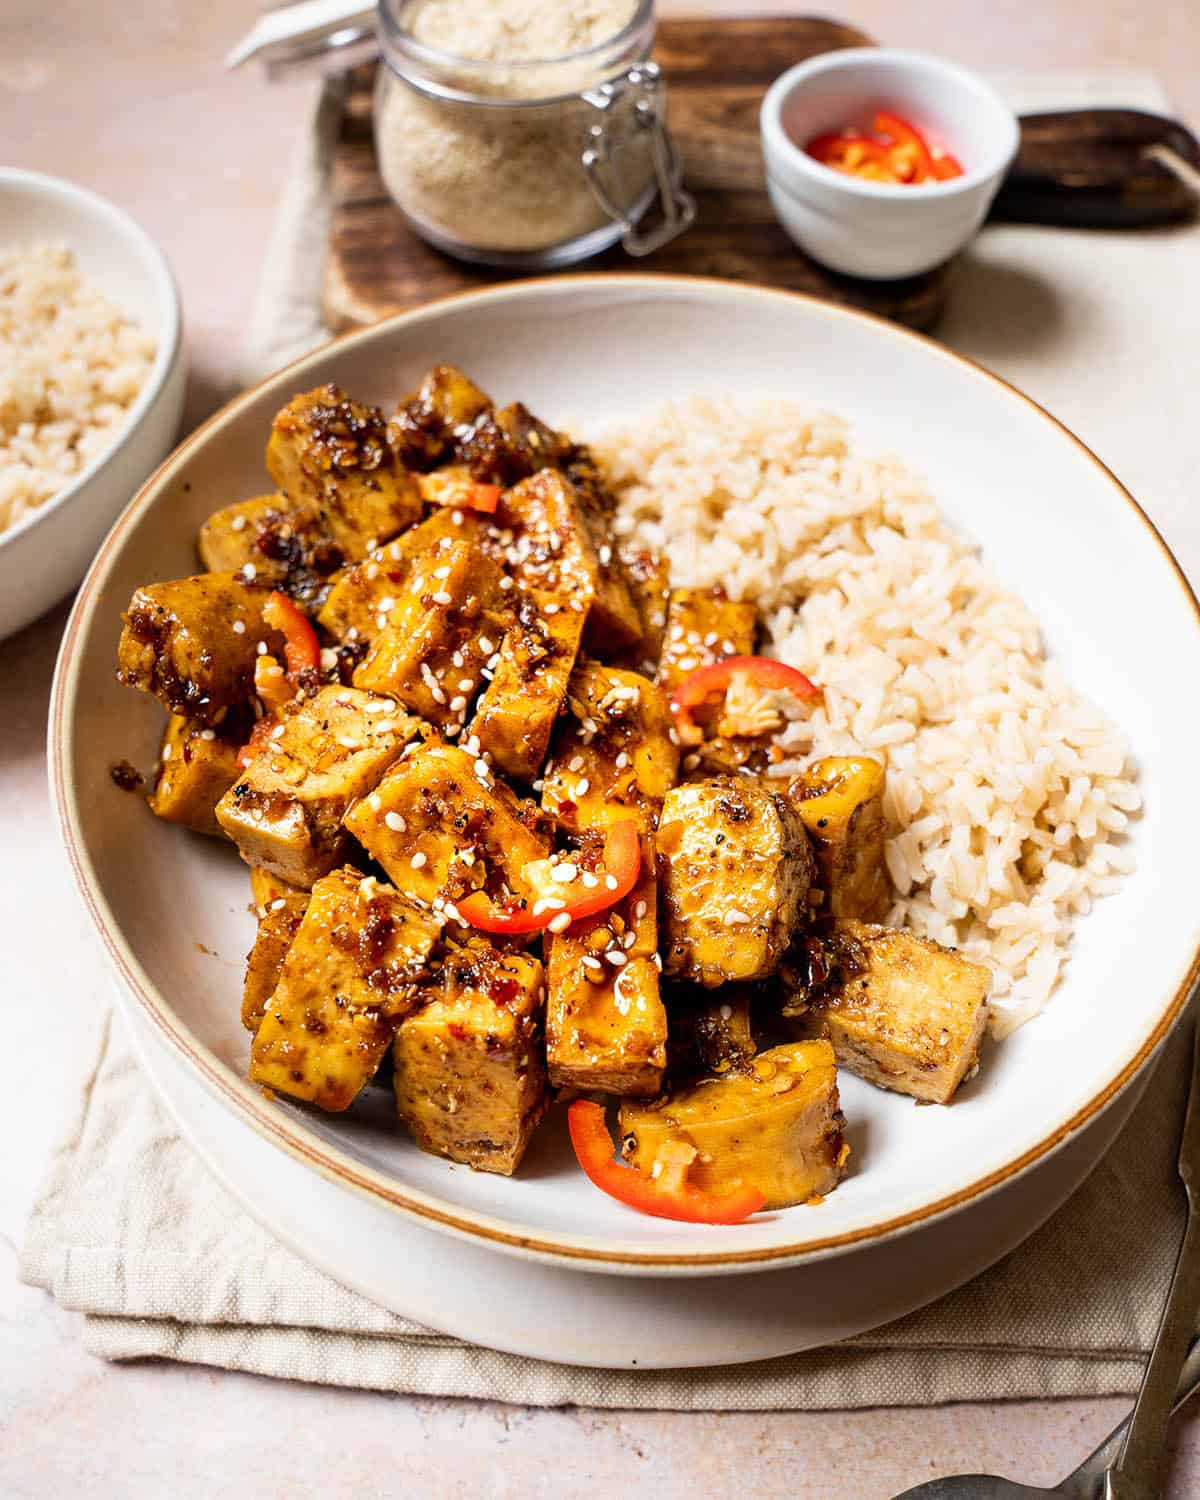 Pieces of Szechuan tofu in a bowl with brown rice and chillis and sesame seeds in the background.